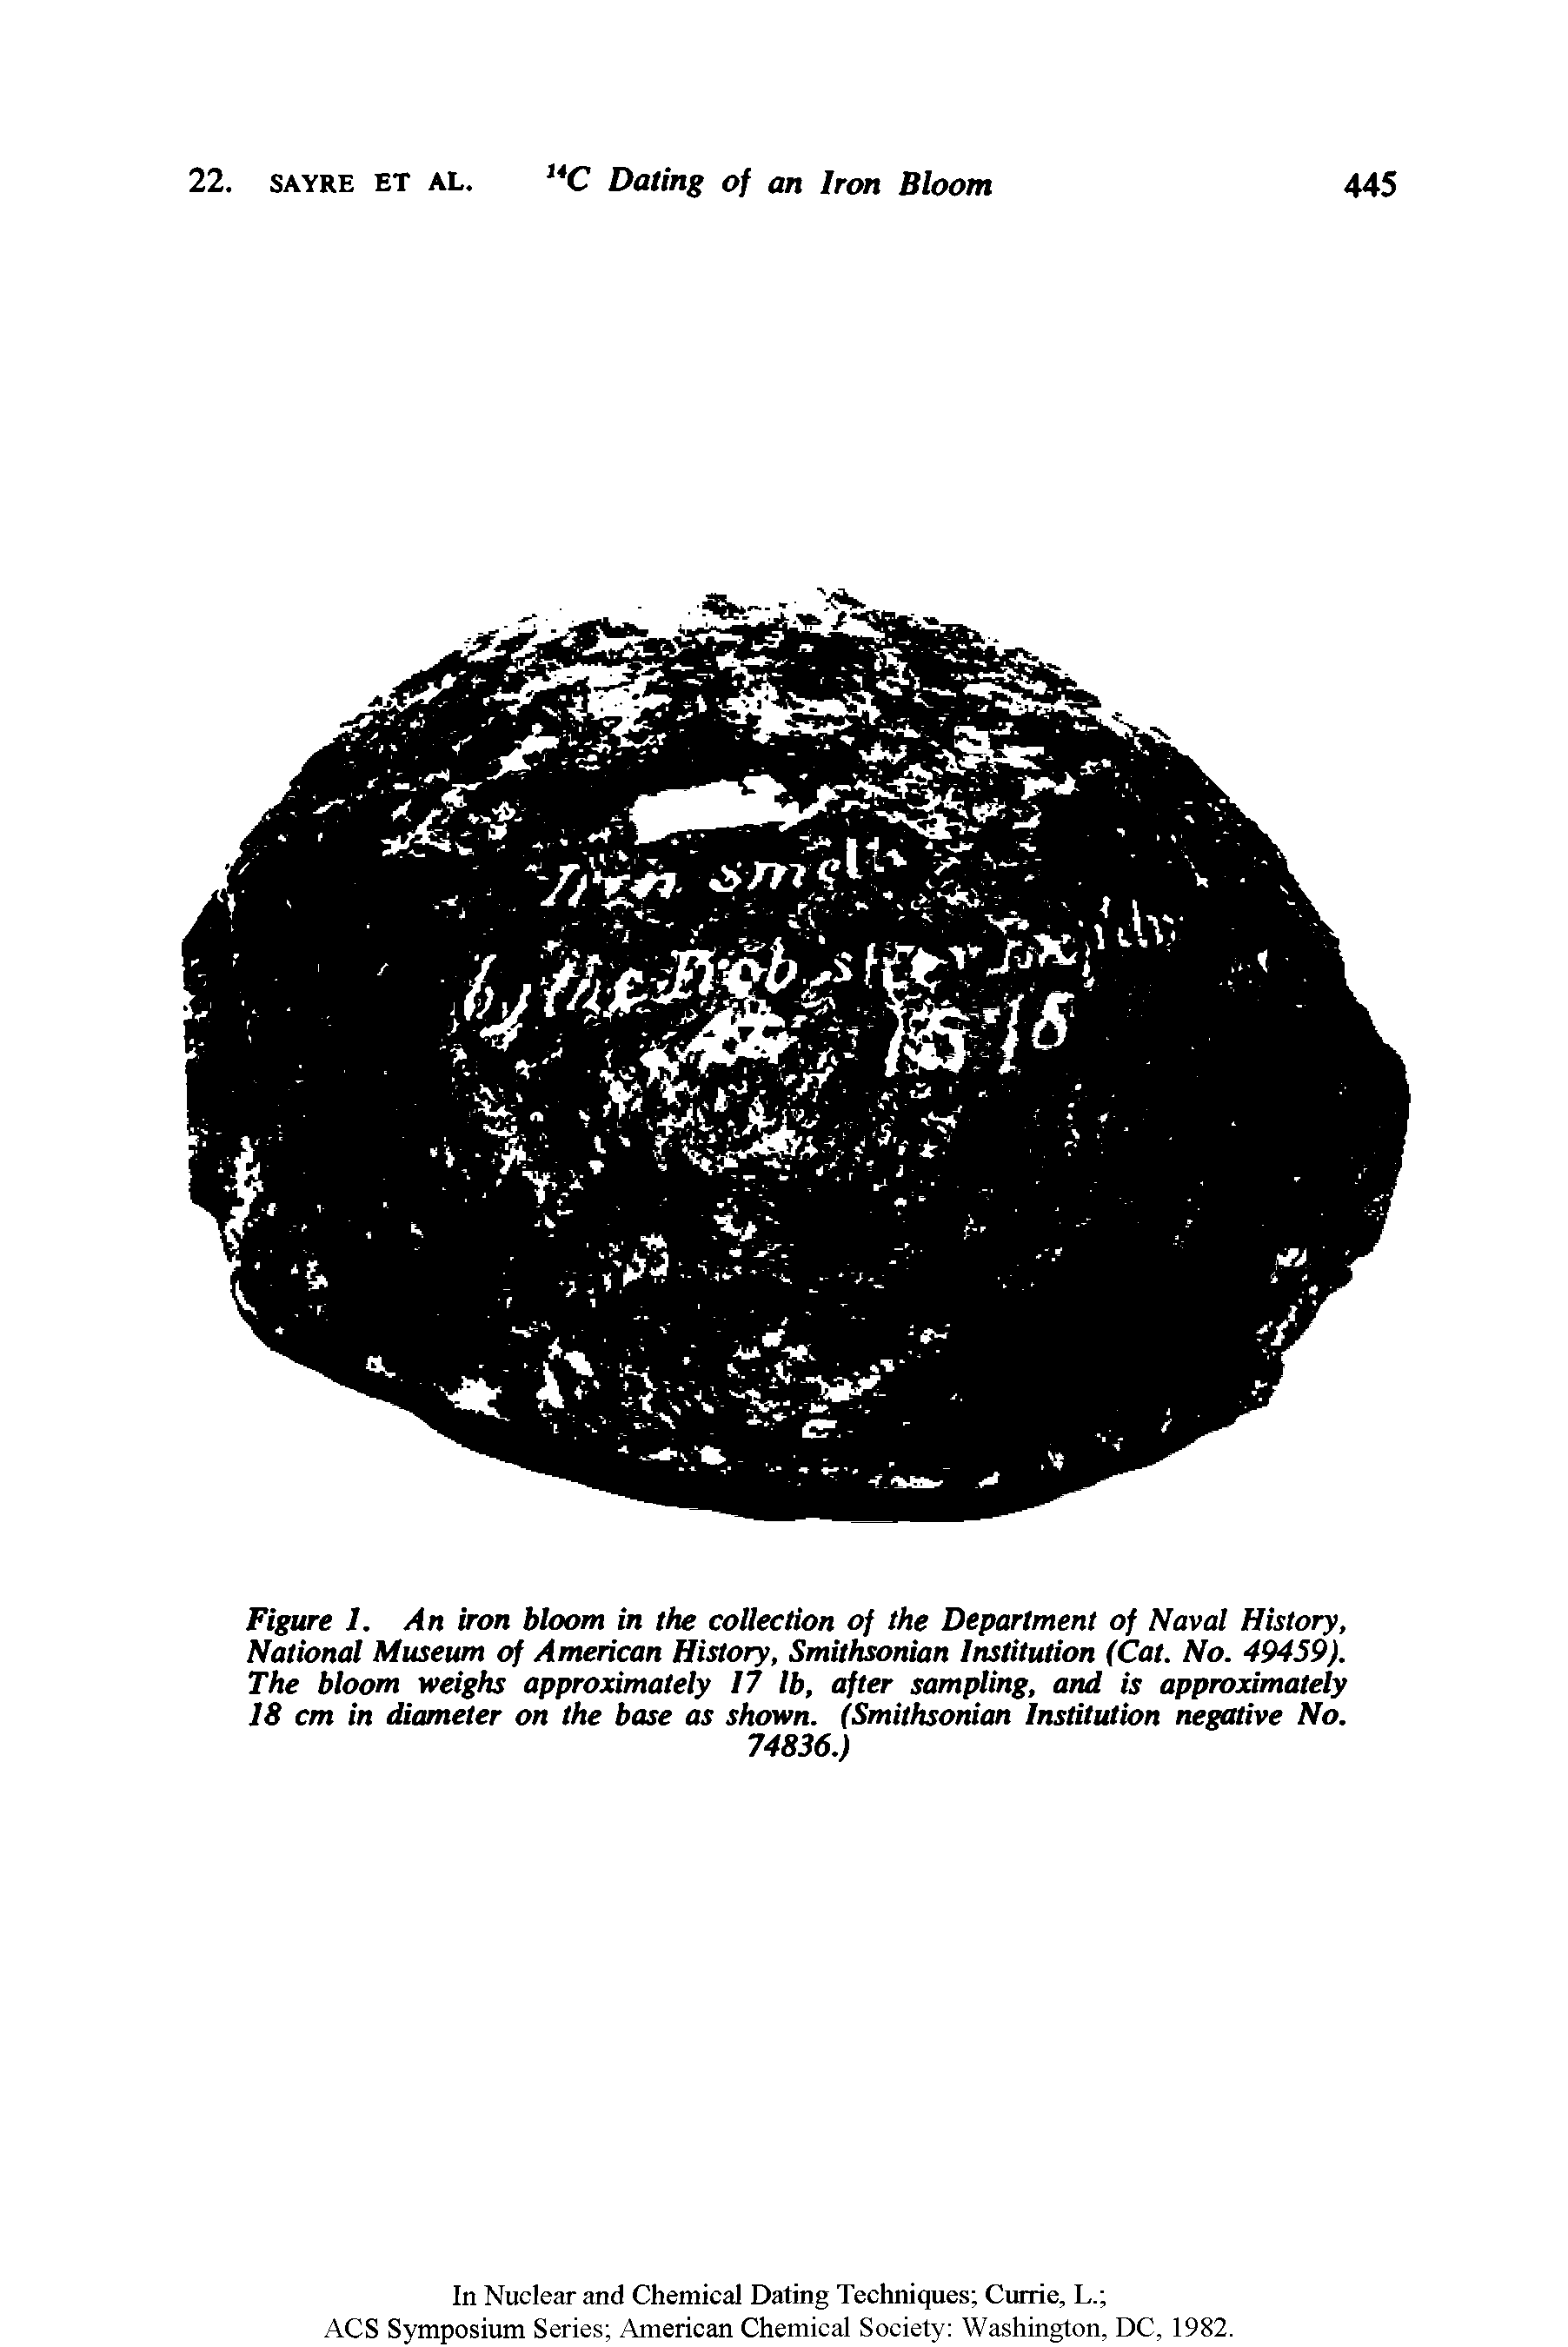 Figure 1. An iron bloom in the collection of the Department of Naval History, National Museum of American History, Smithsonian Institution (Cat. No. 49459). The bloom weighs approximately 17 lb, after sampling, and is approximately 18 cm in diameter on the base as shown. (Smithsonian Institution negative No.